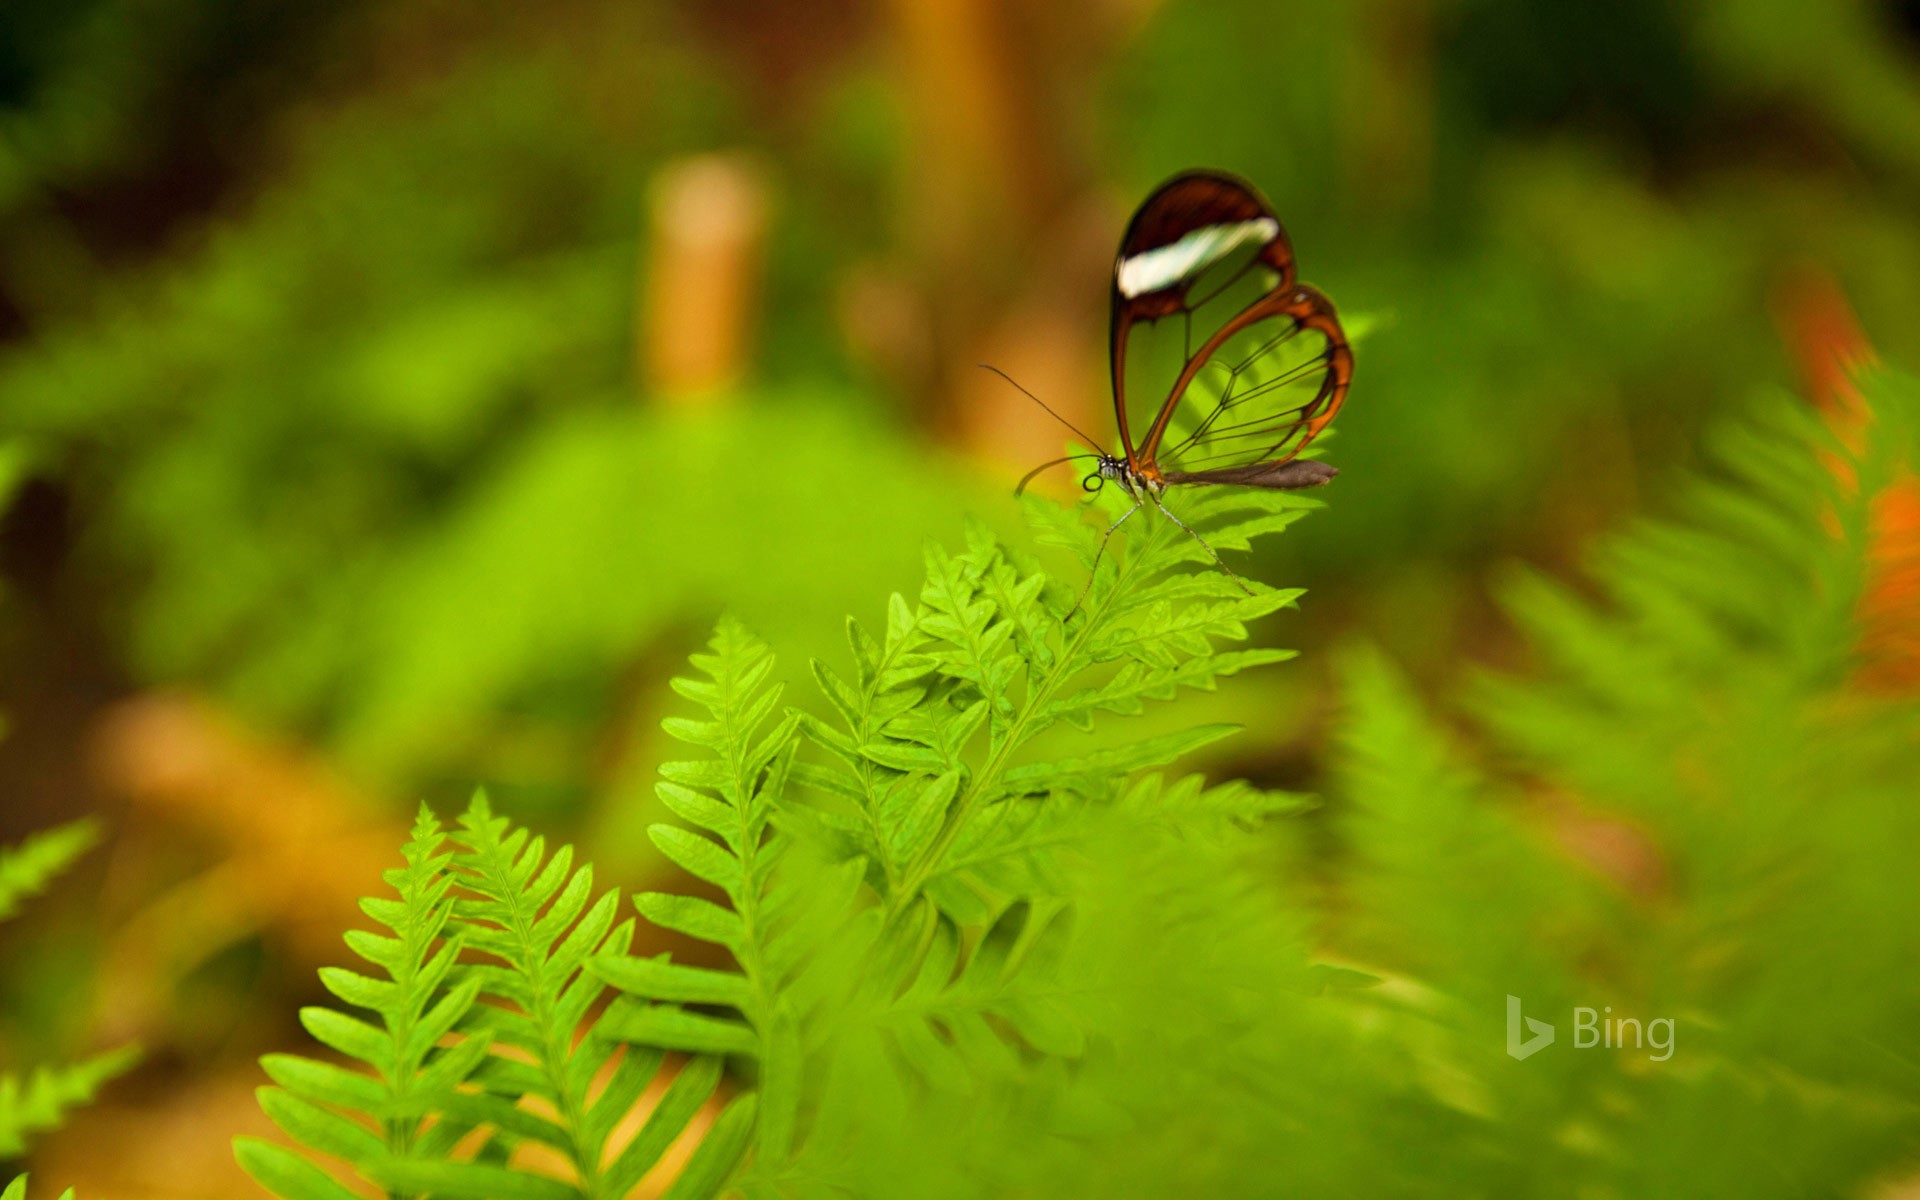 A glasswing butterfly perched on a leaf